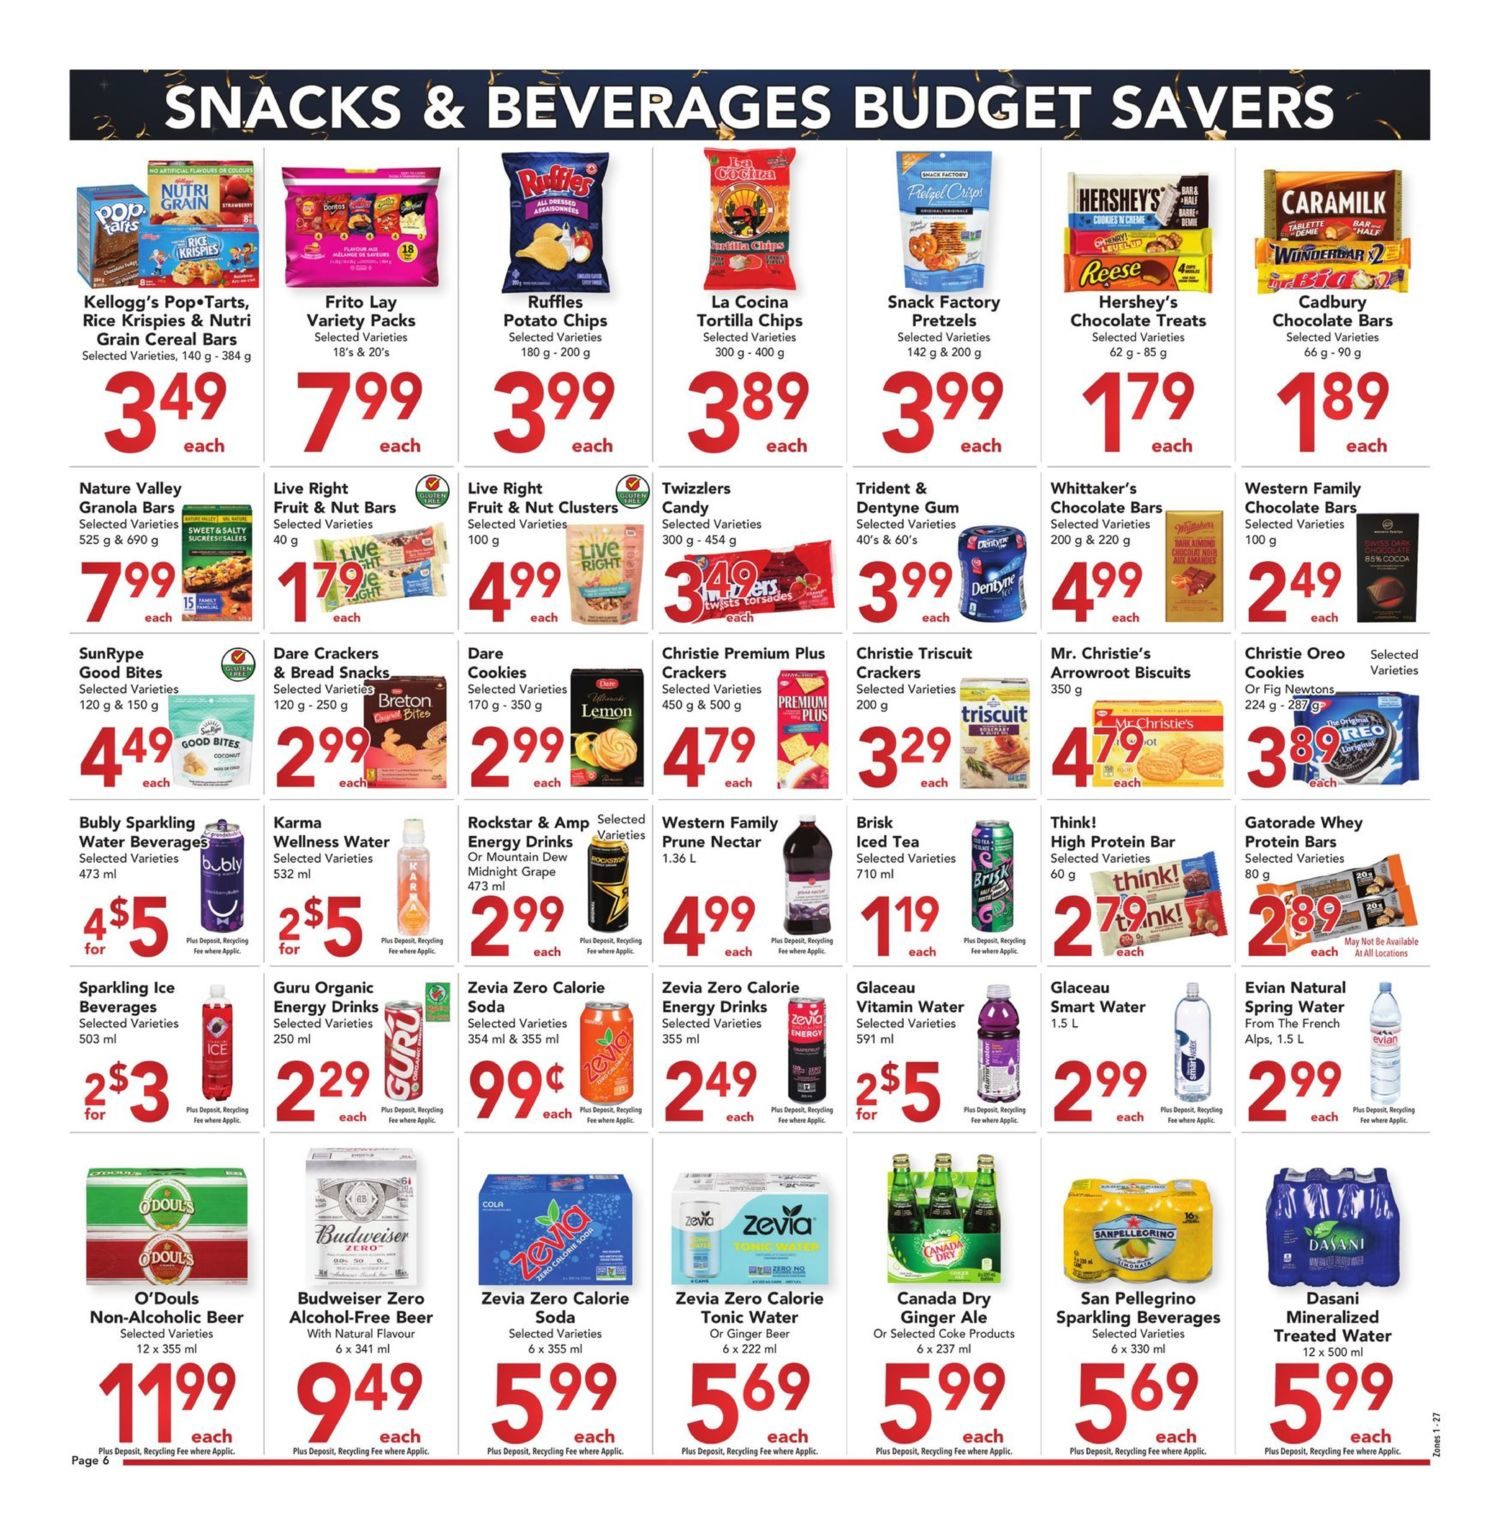 Buy-Low Foods - Budget Savers - Page 6